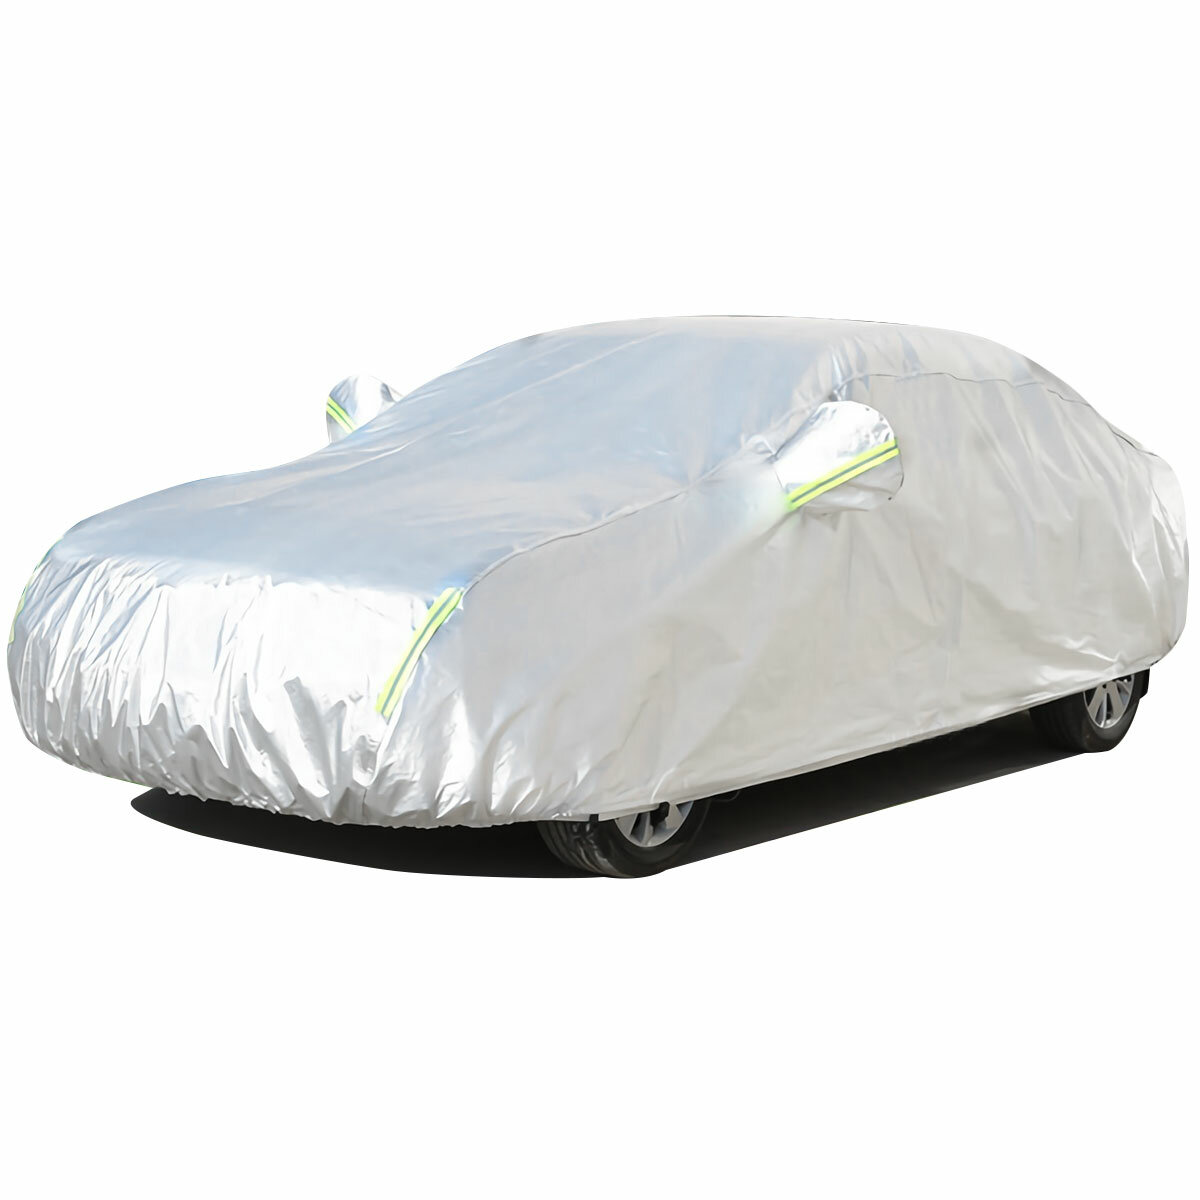 Image of 1PC Full Car Cover For Hatchback Waterproof Dust-proof UV Resistant Outdoor All Weather Protection With Reflective Strip